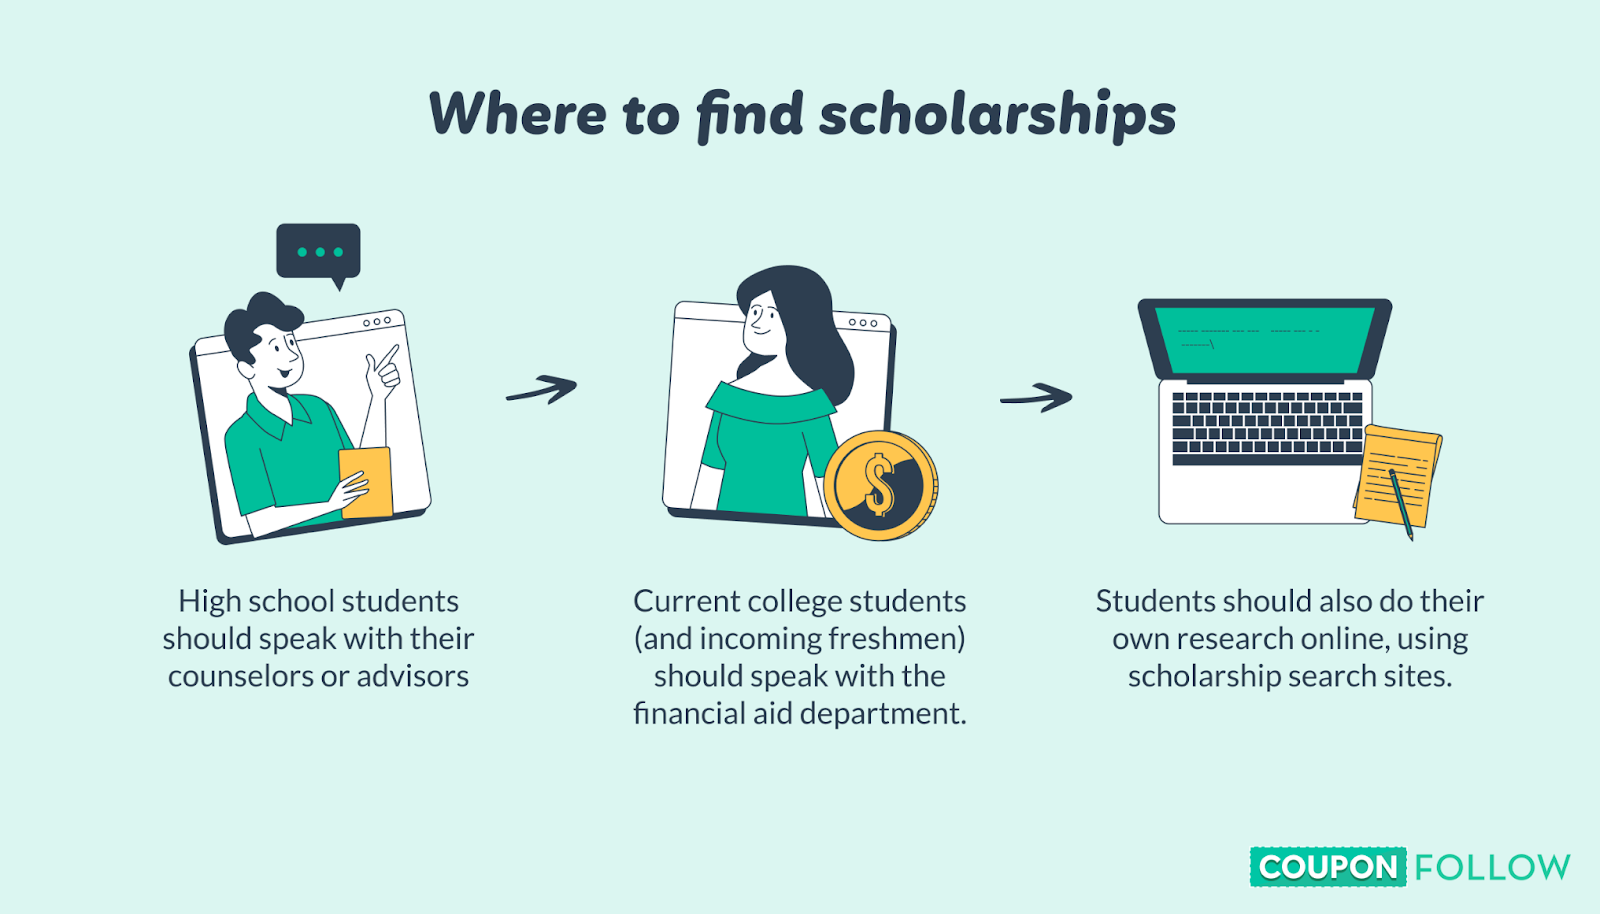 Main sources of scholarships